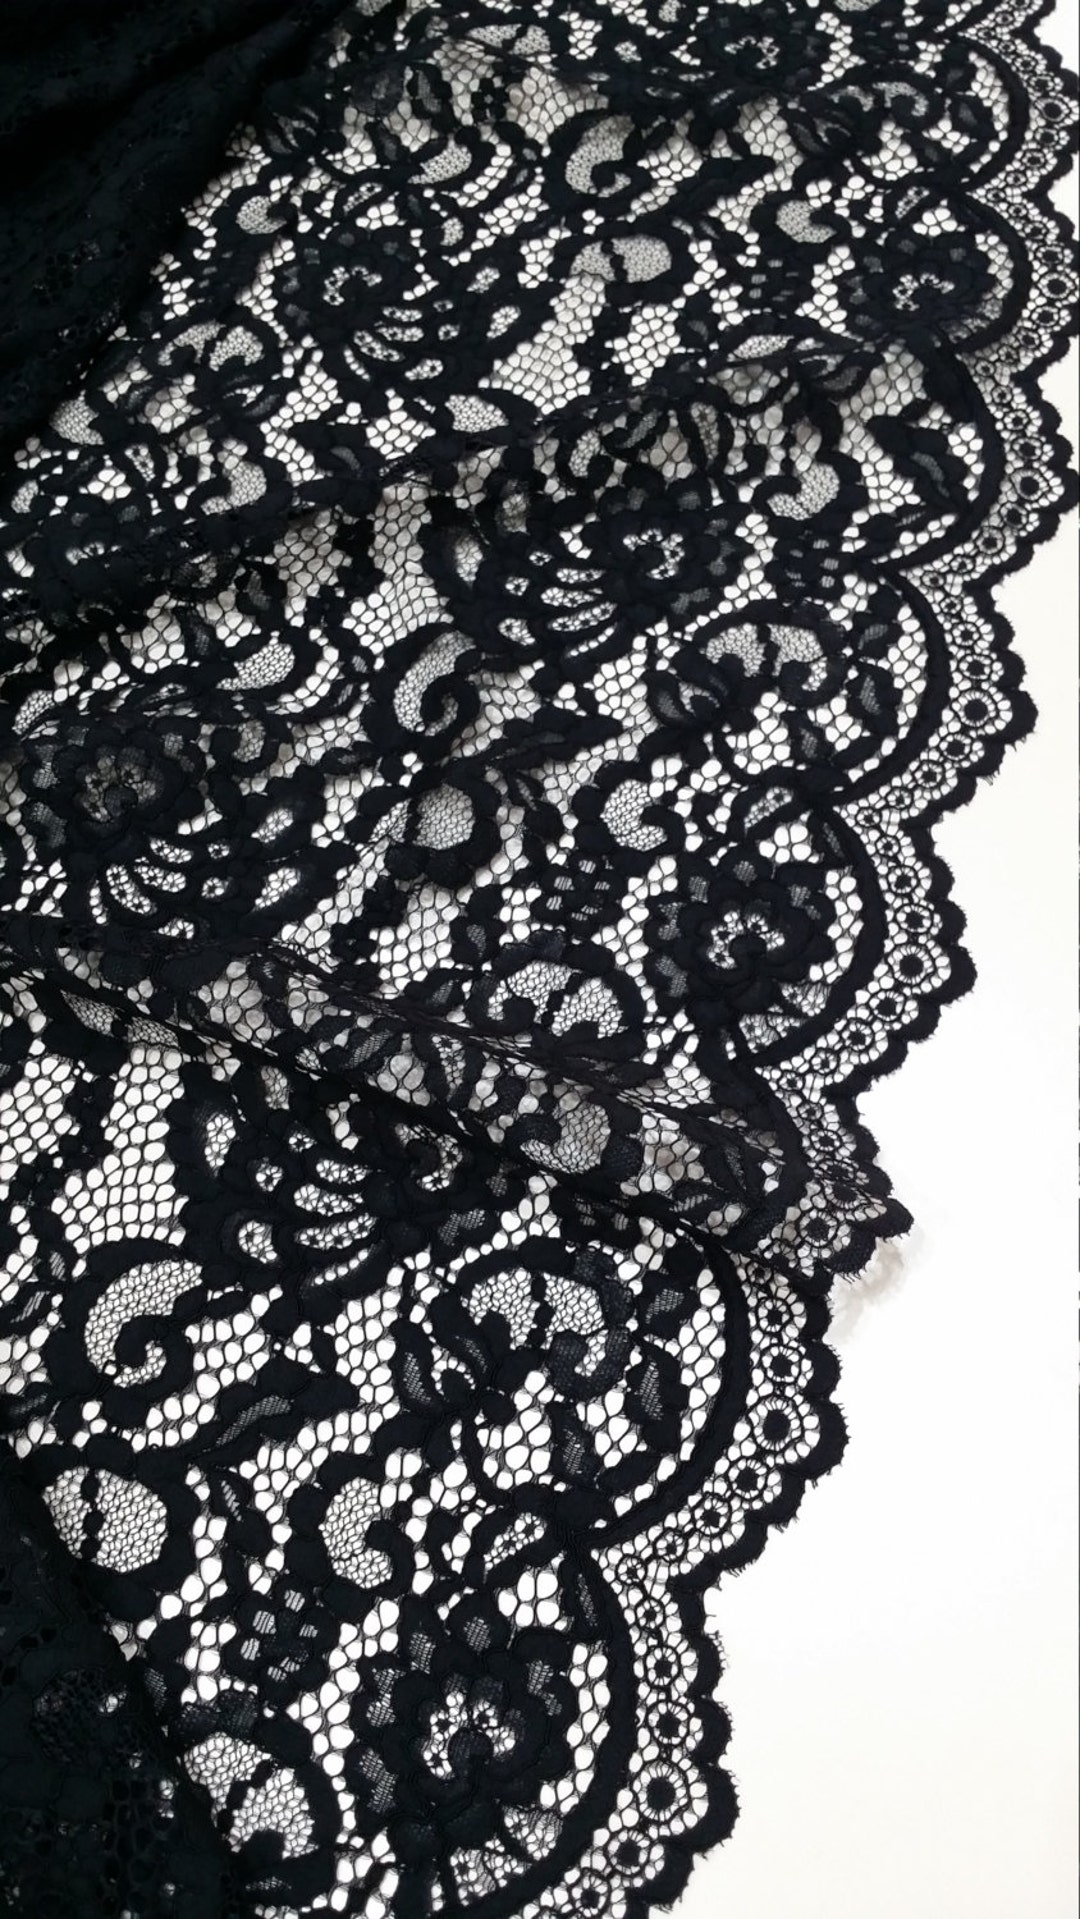 Black Lace Fabric by the Yard France Lace Alencon Lace - Etsy